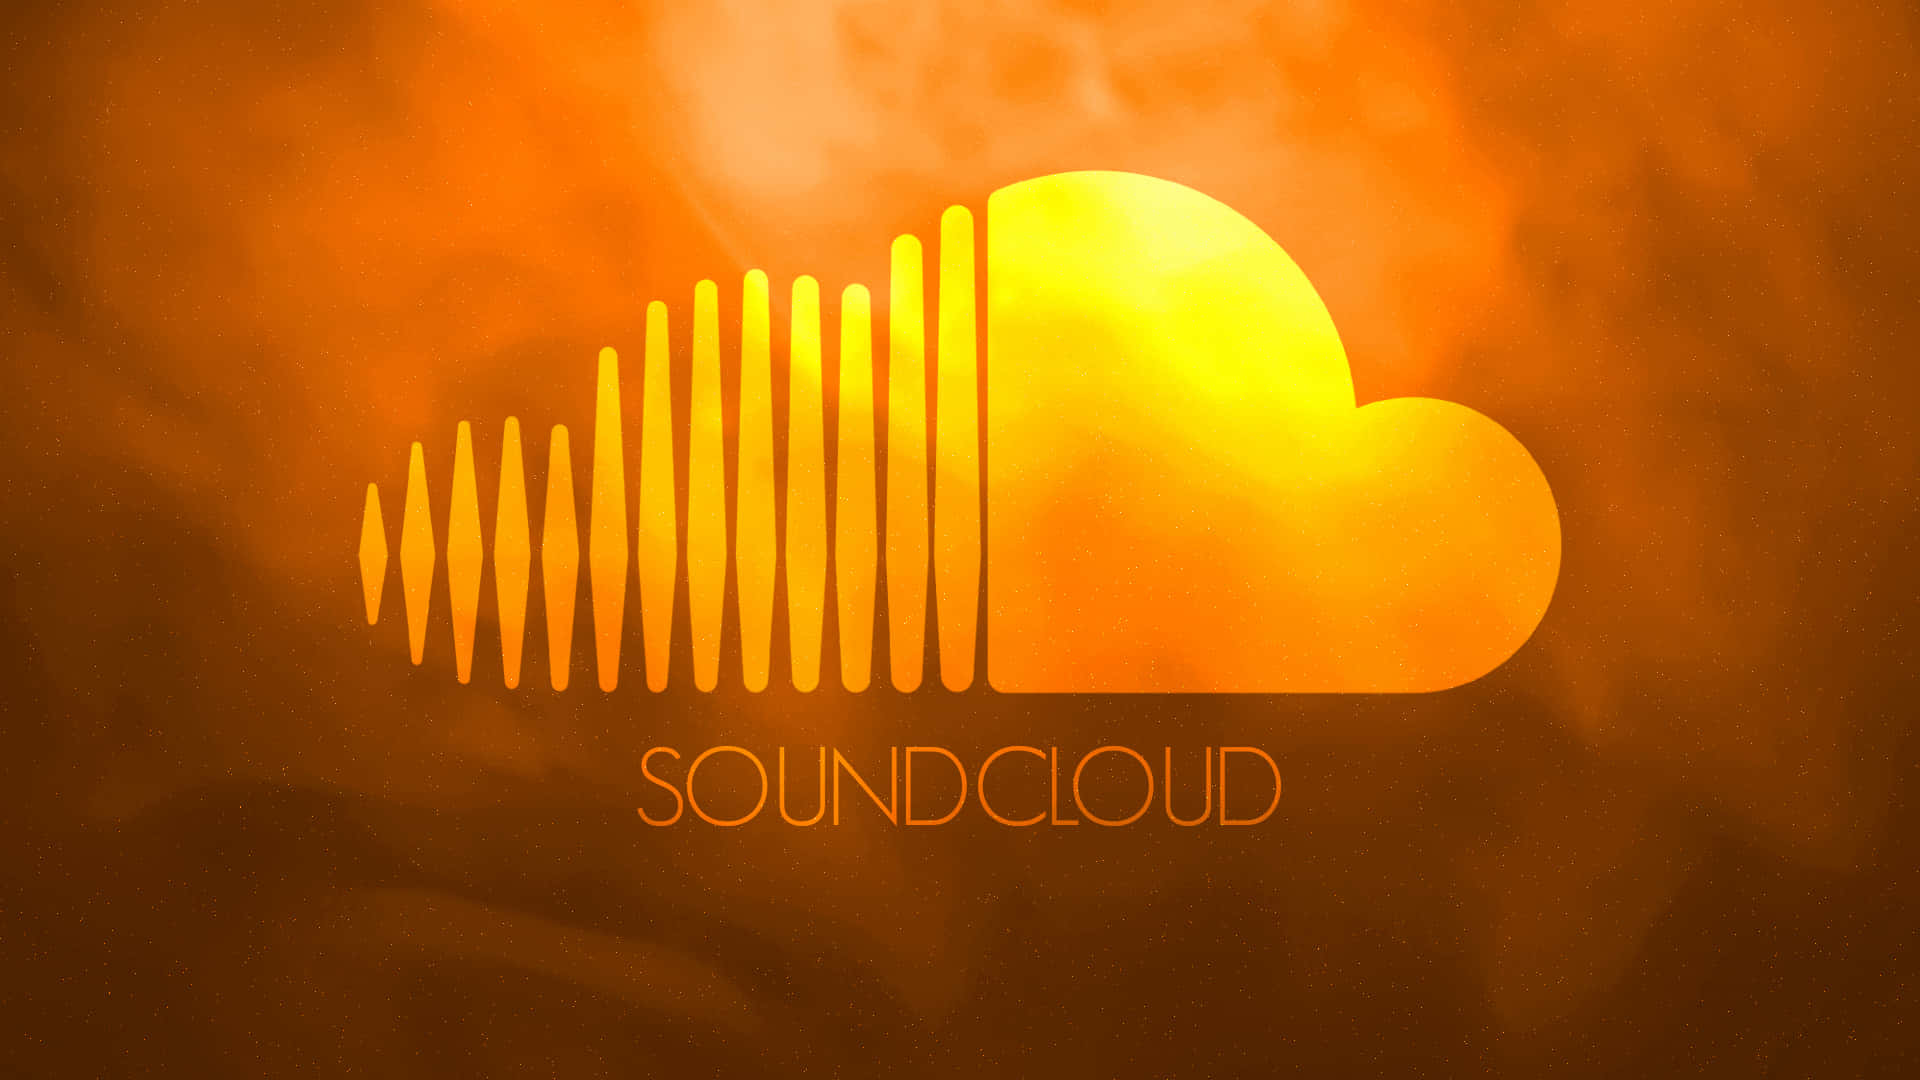 Audio democratized - anyone can create and share their music on Soundcloud!